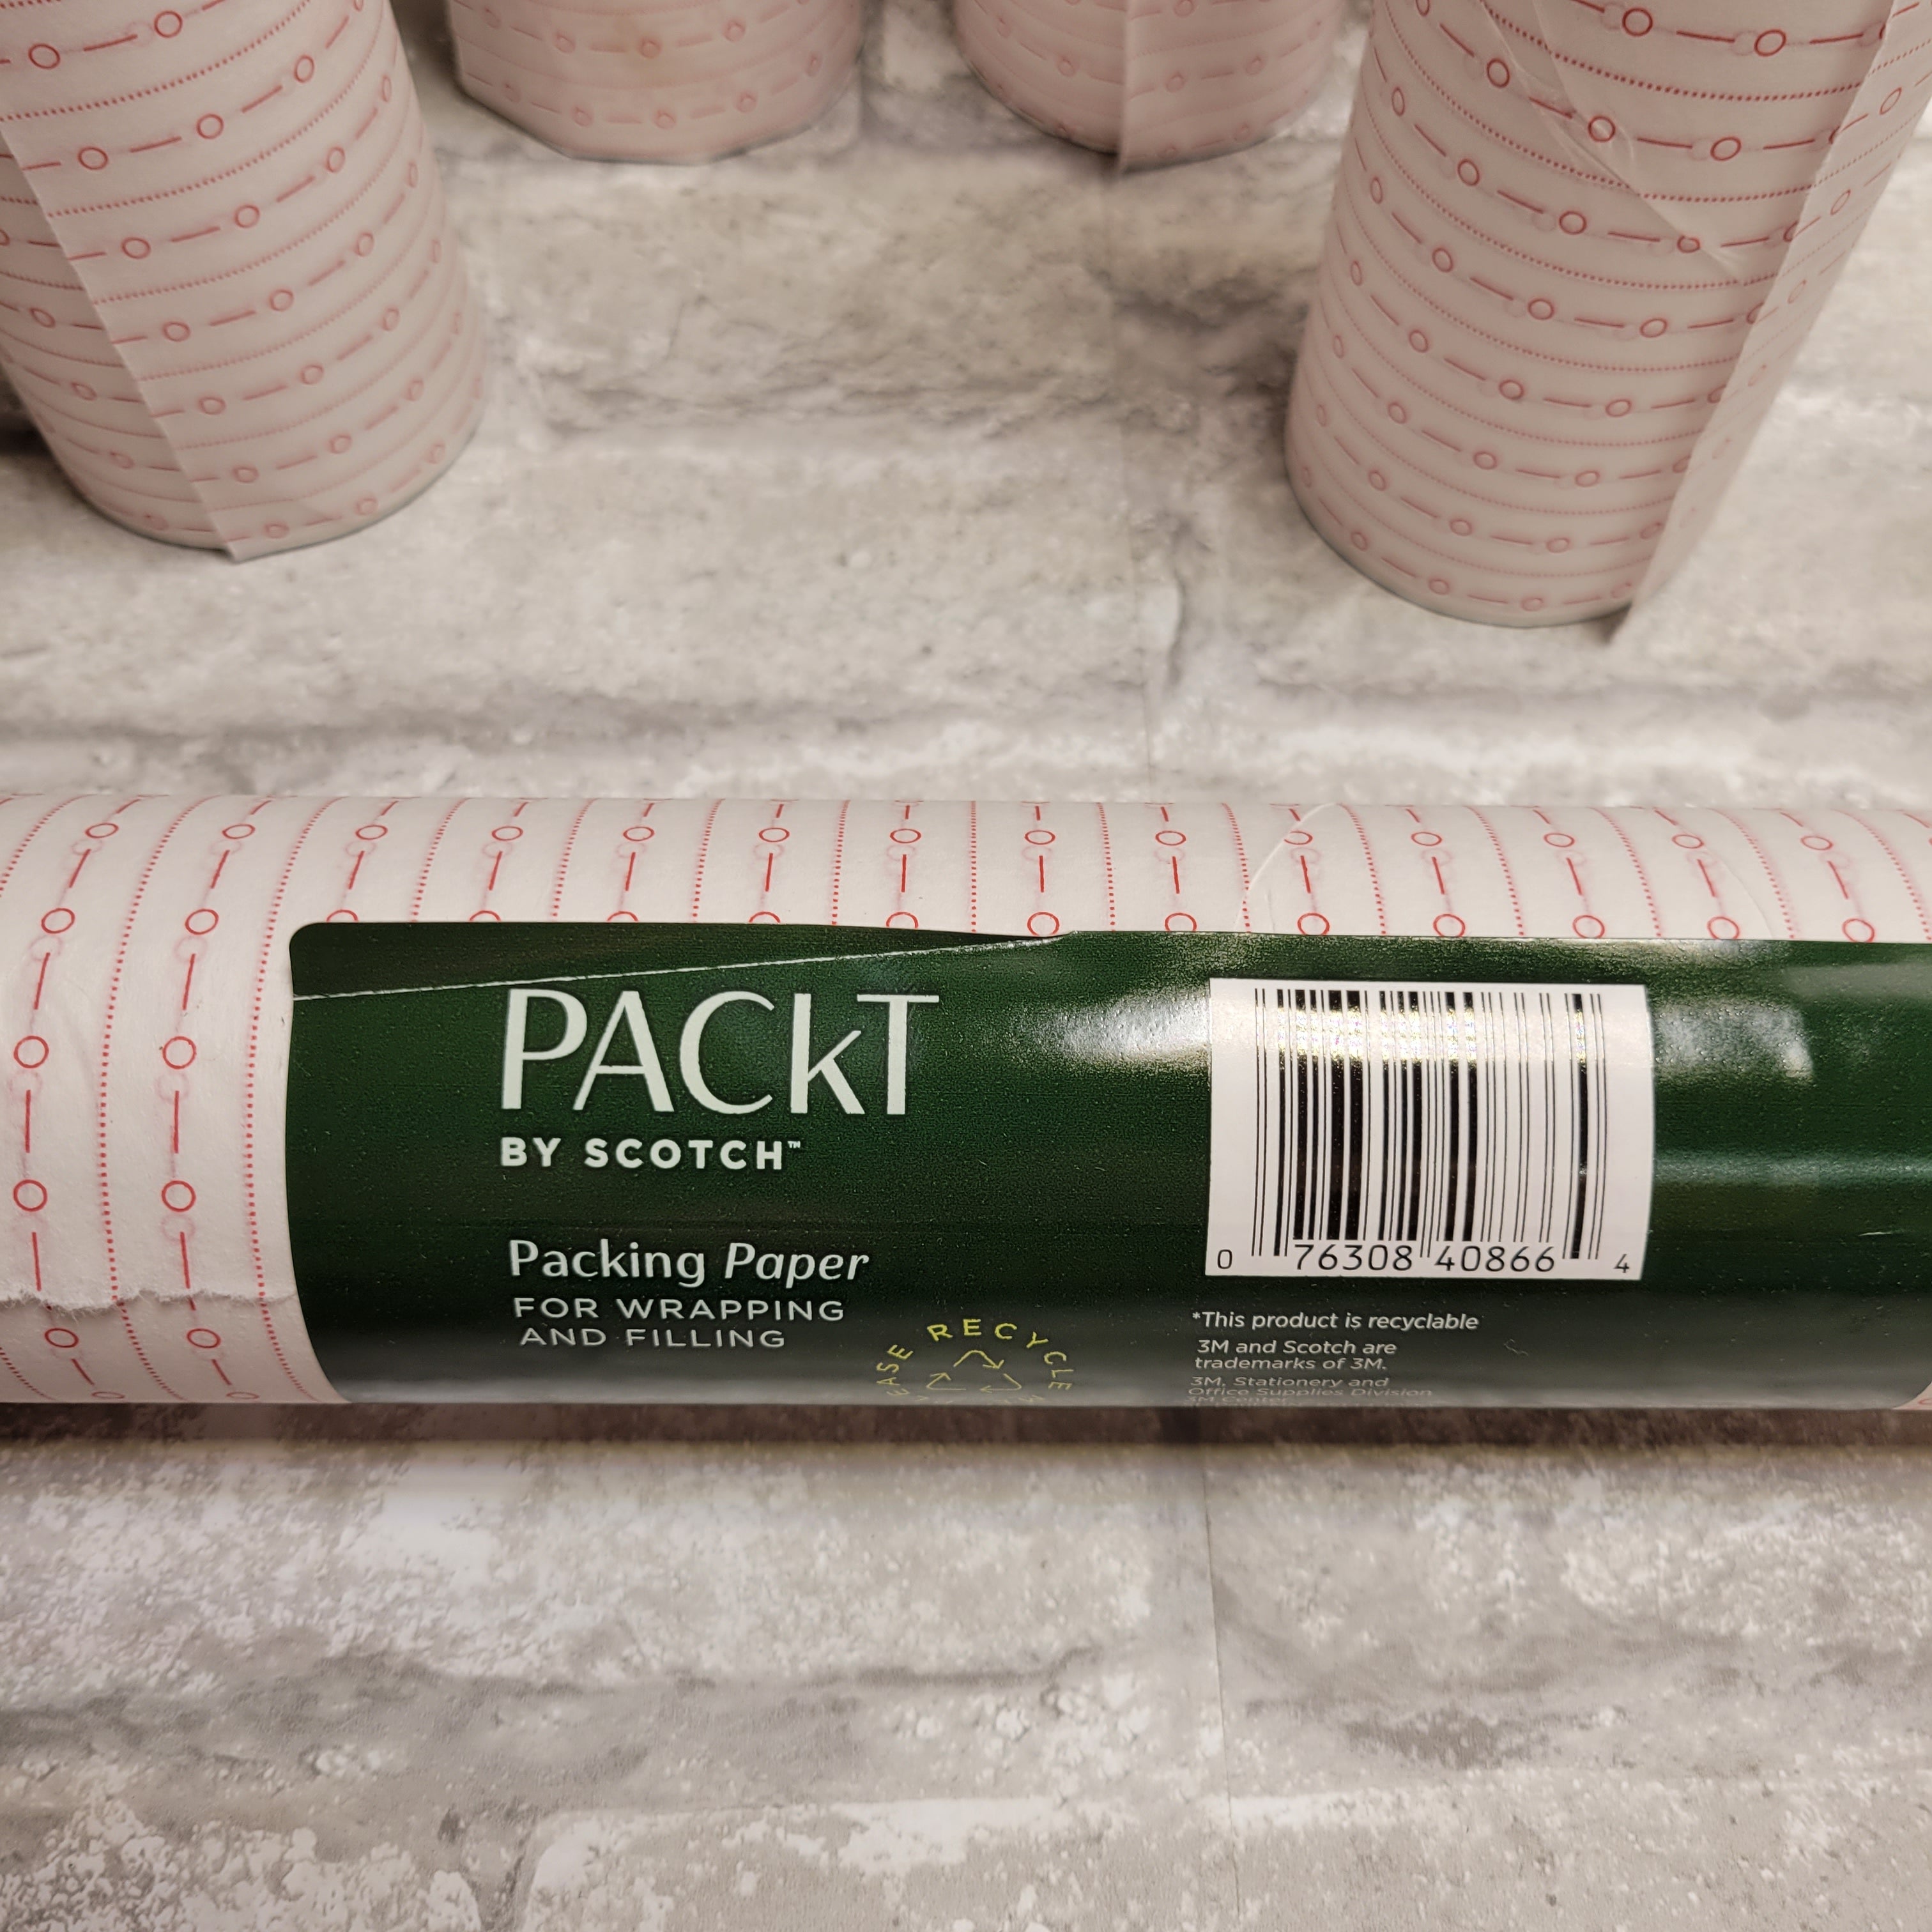 Packt by Scotch Packing Paper